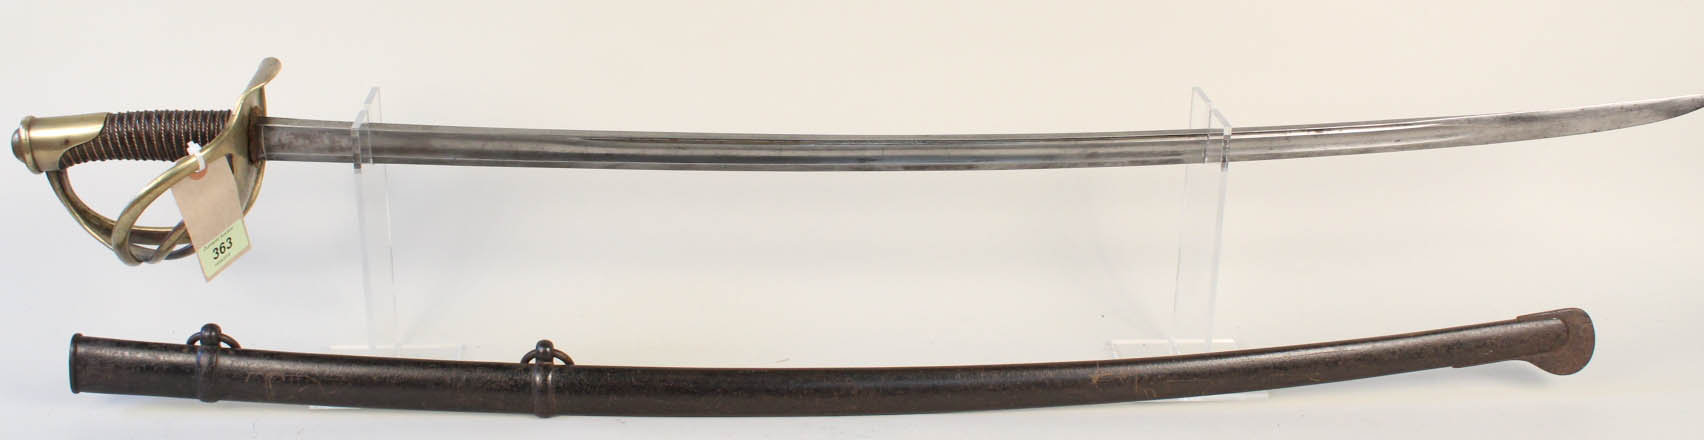 A French 1822 patt heavy Cavalry sabre (dated 1829) with scabbard